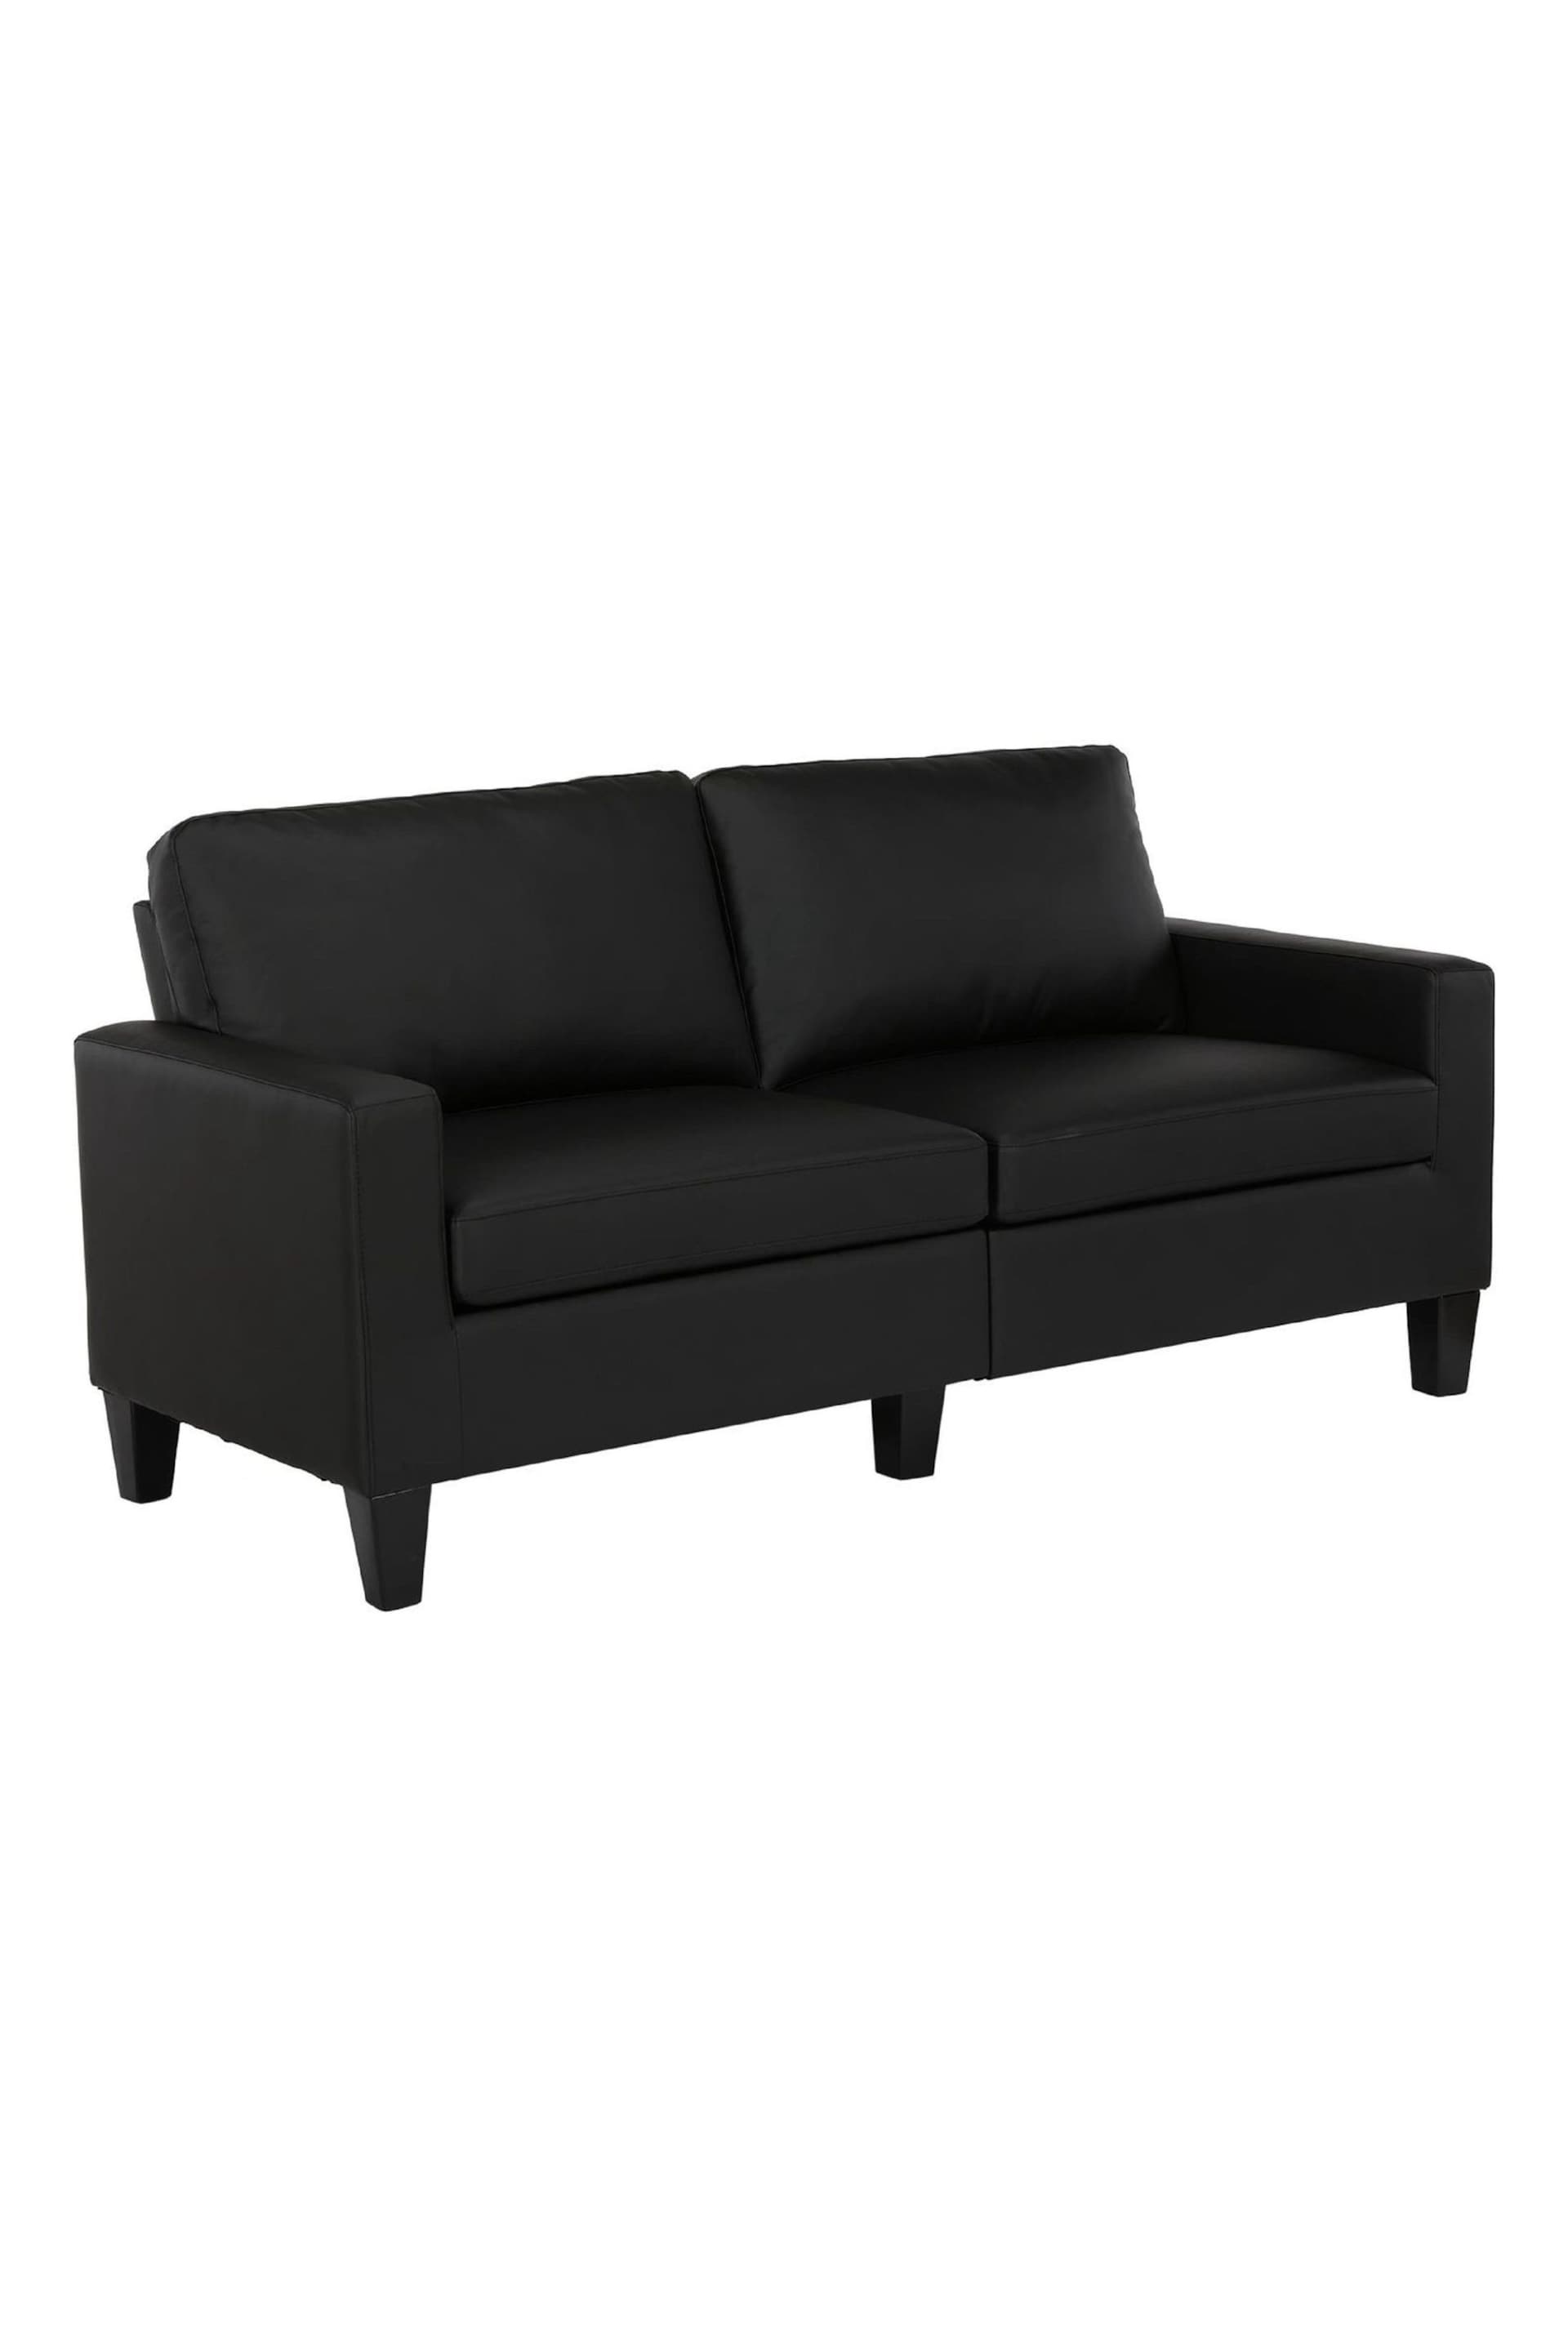 Dorel Home Black Europe Rylie Faux Leather Sofa - Image 3 of 4